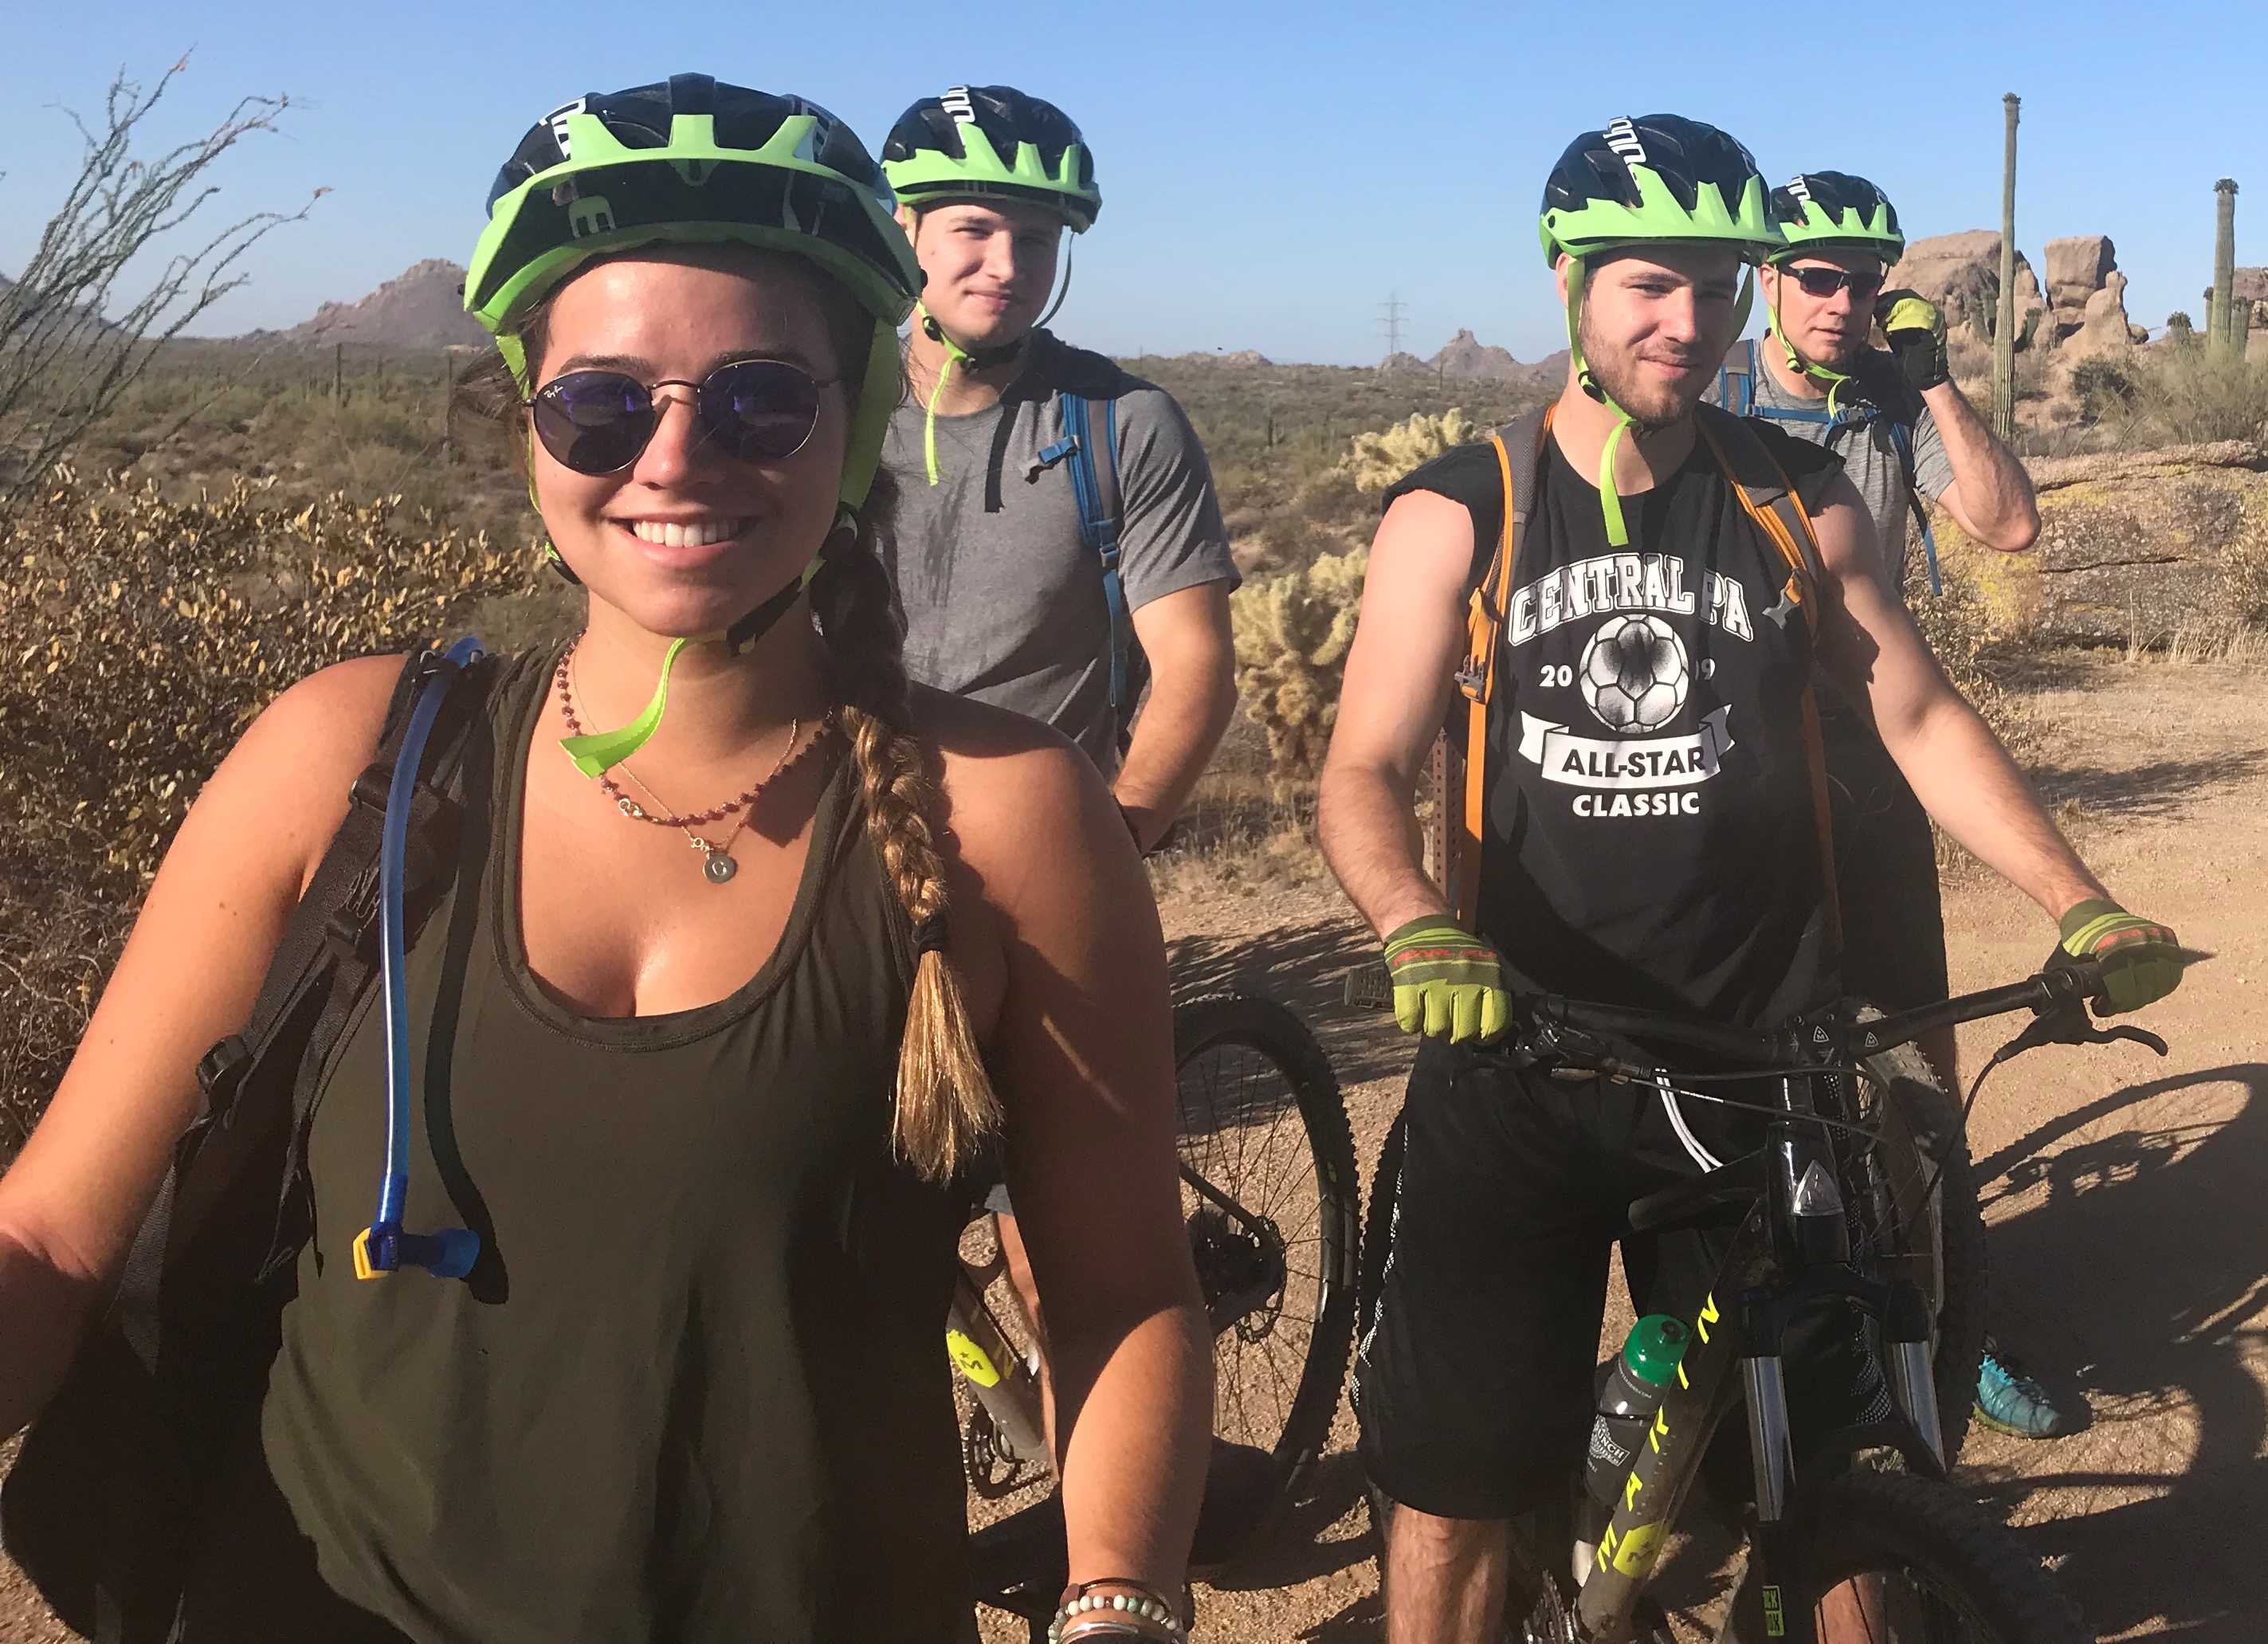 During the Heinly's first trip to Arizona in 2018, the group of family cyclists included, left to right: daughter Carmen, sons Quinten Heinly and Gavin, and father Chris.